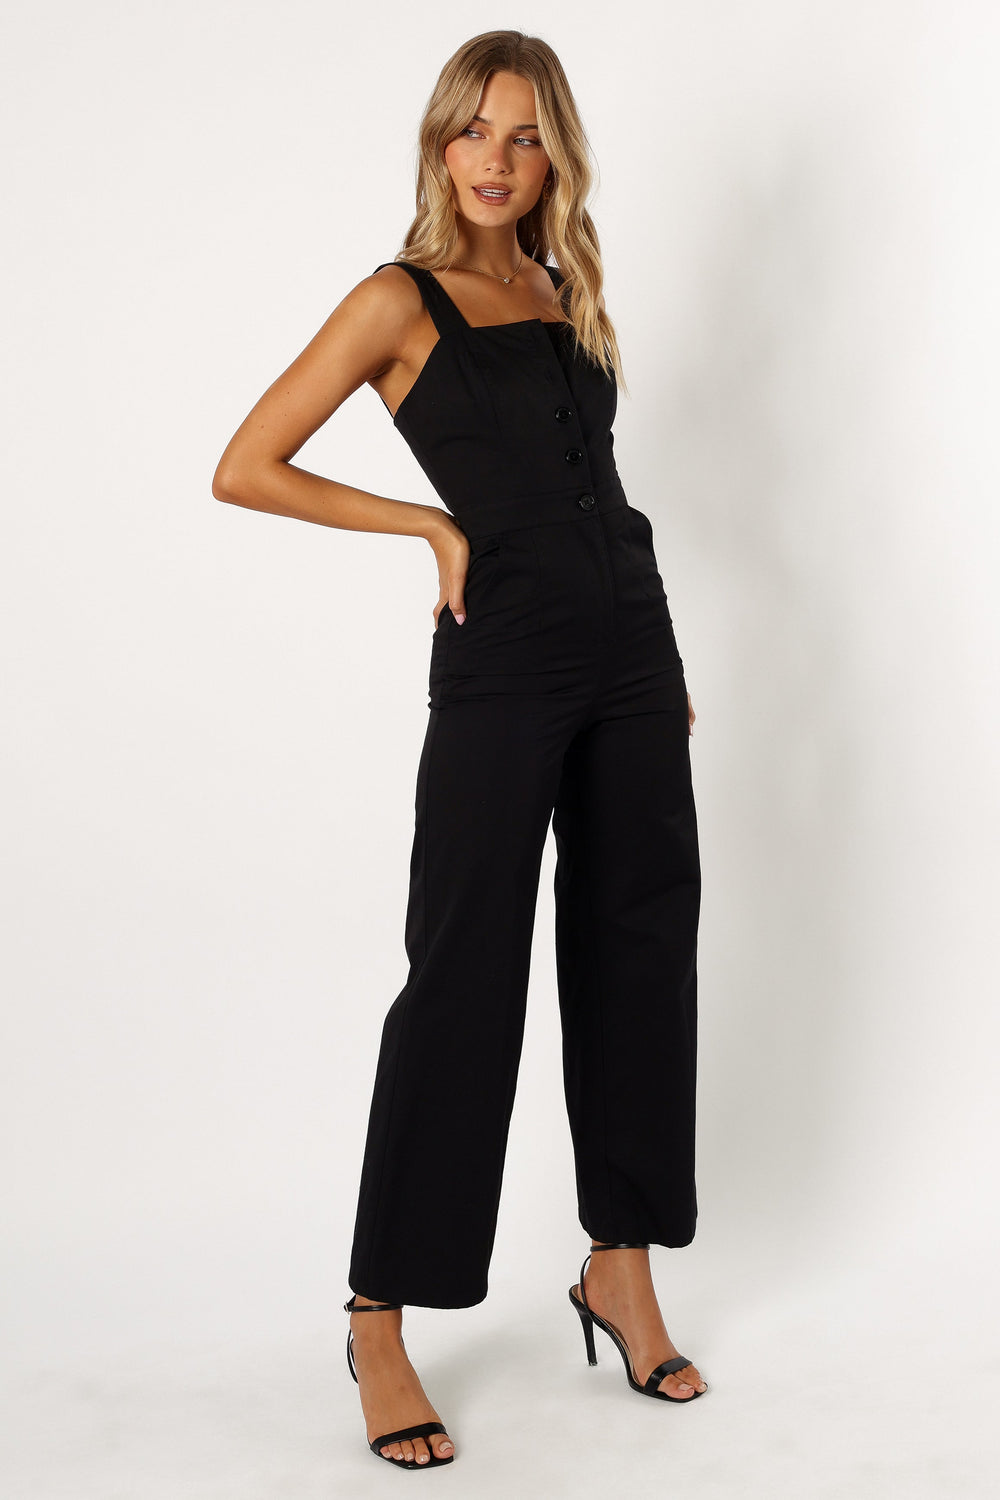 Petal and Pup USA Rompers Gwen Jumpsuit - Black